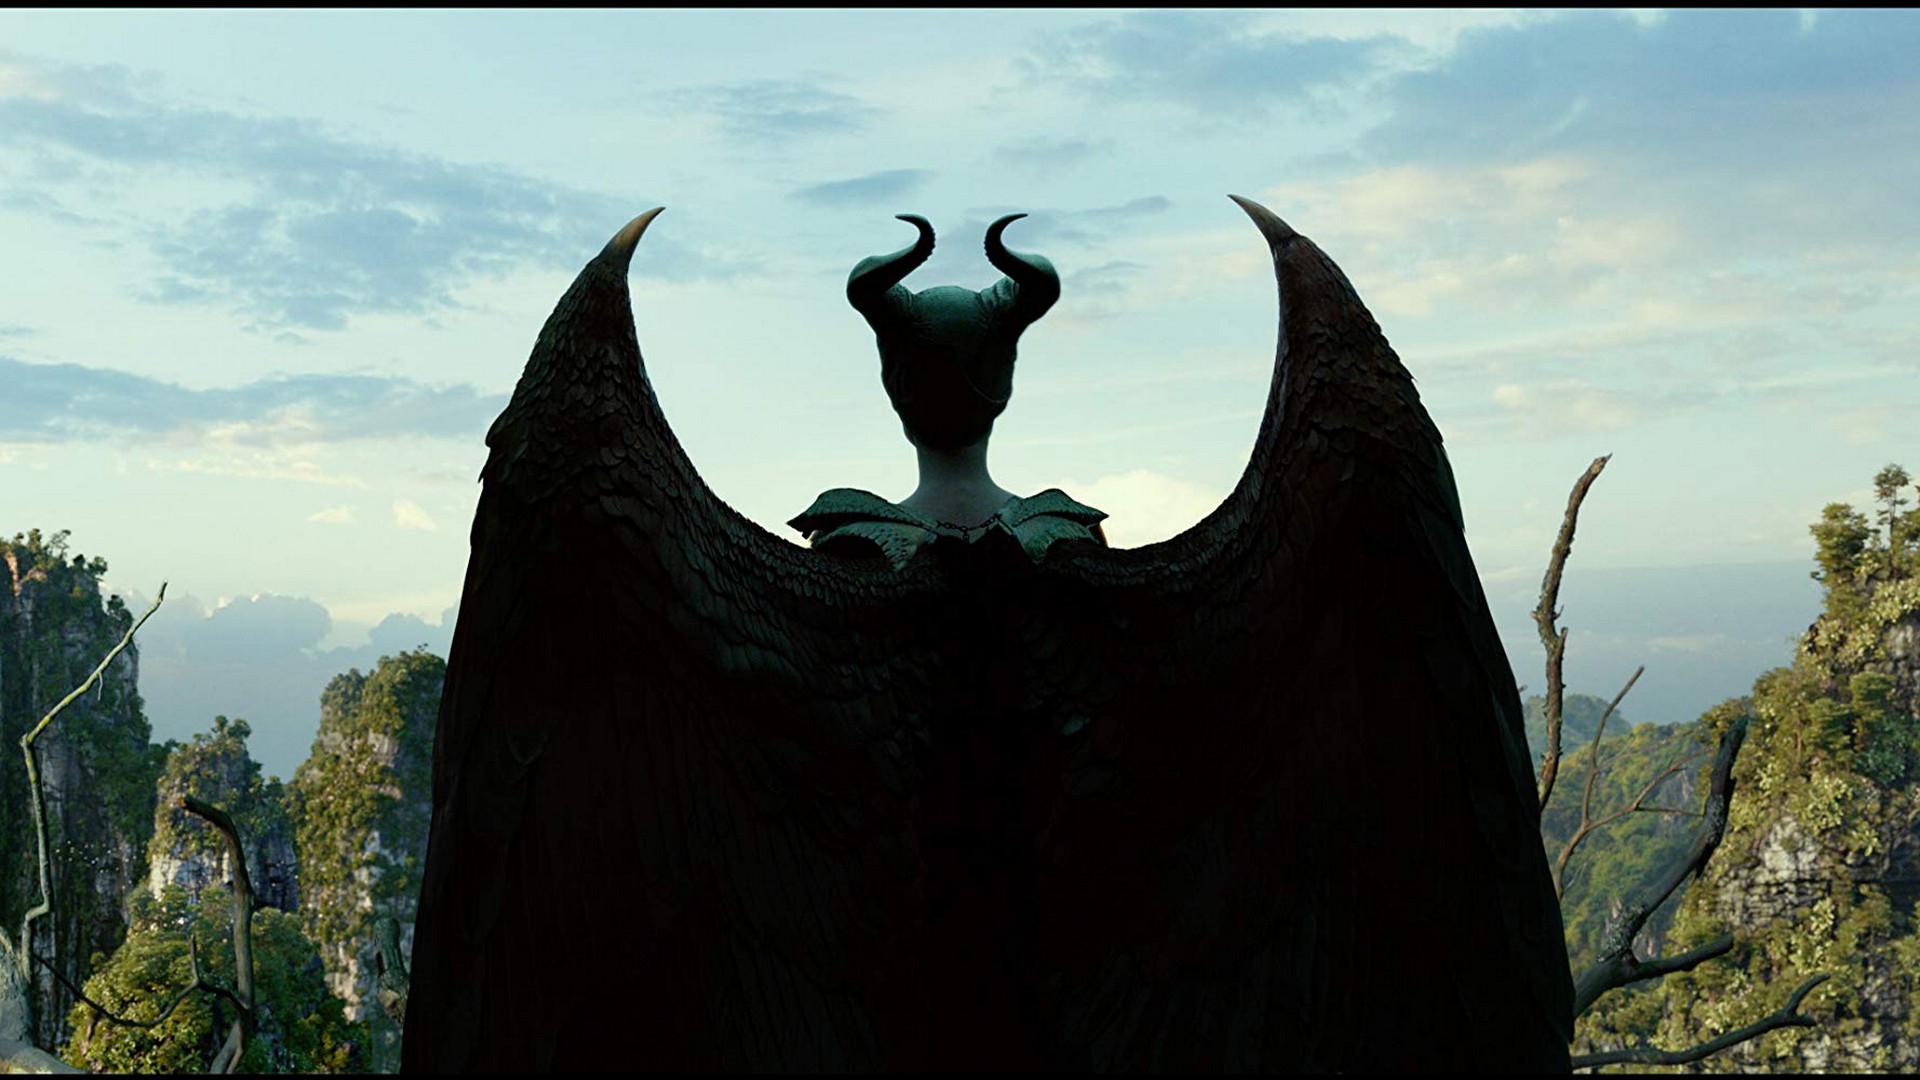 Maleficent Mistress of Evil Trailer Wallpaper with high-resolution 1920x1080 pixel. You can use this poster wallpaper for your Desktop Computers, Mac Screensavers, Windows Backgrounds, iPhone Wallpapers, Tablet or Android Lock screen and another Mobile device